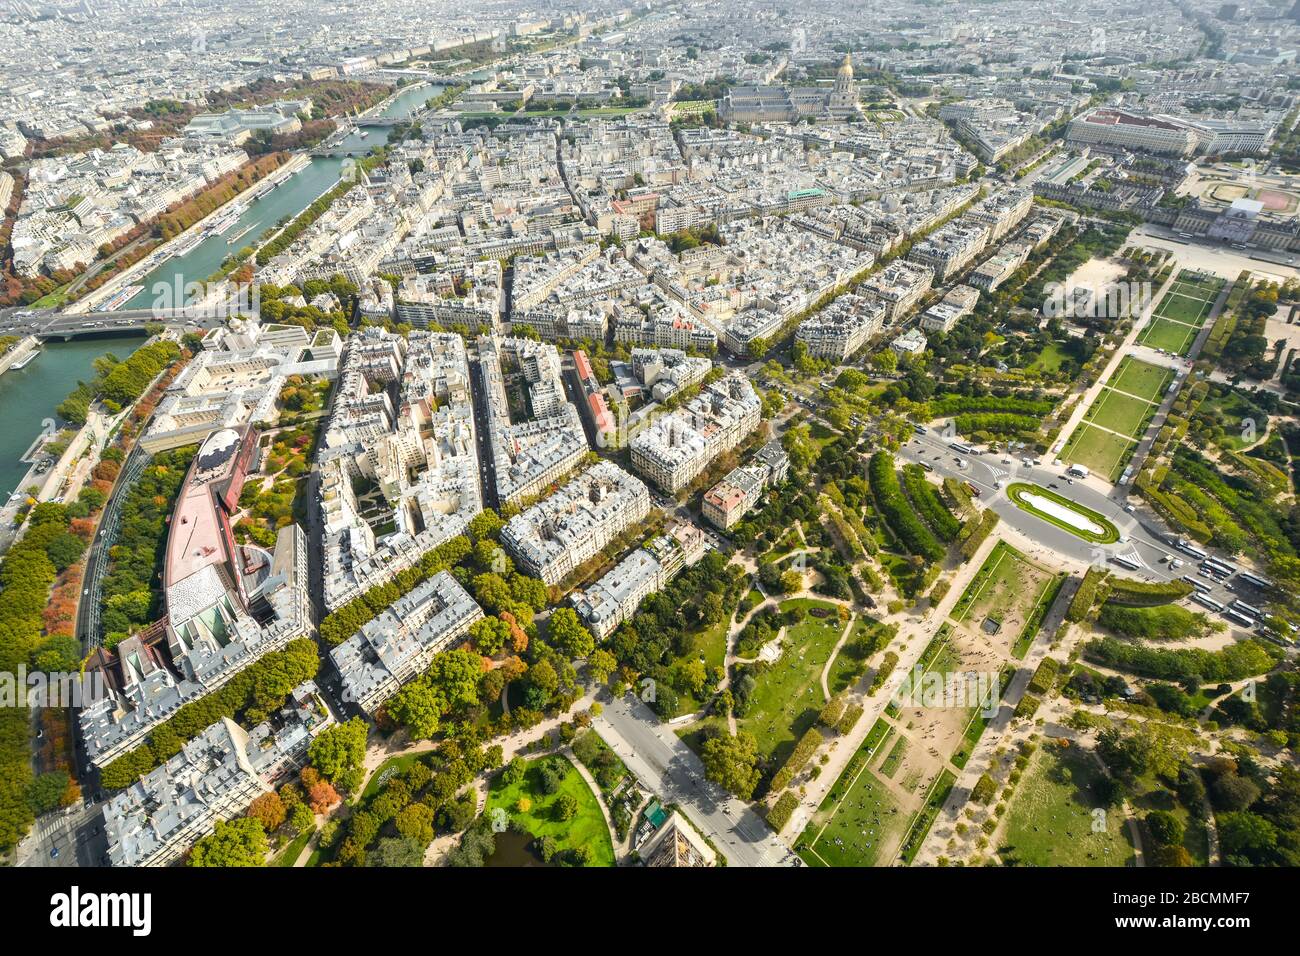 Overhead view from the Eiffel Tower platform of the city of Paris France with the Seine river, Champ de Mars park and Ecole Militaire in view. Stock Photo